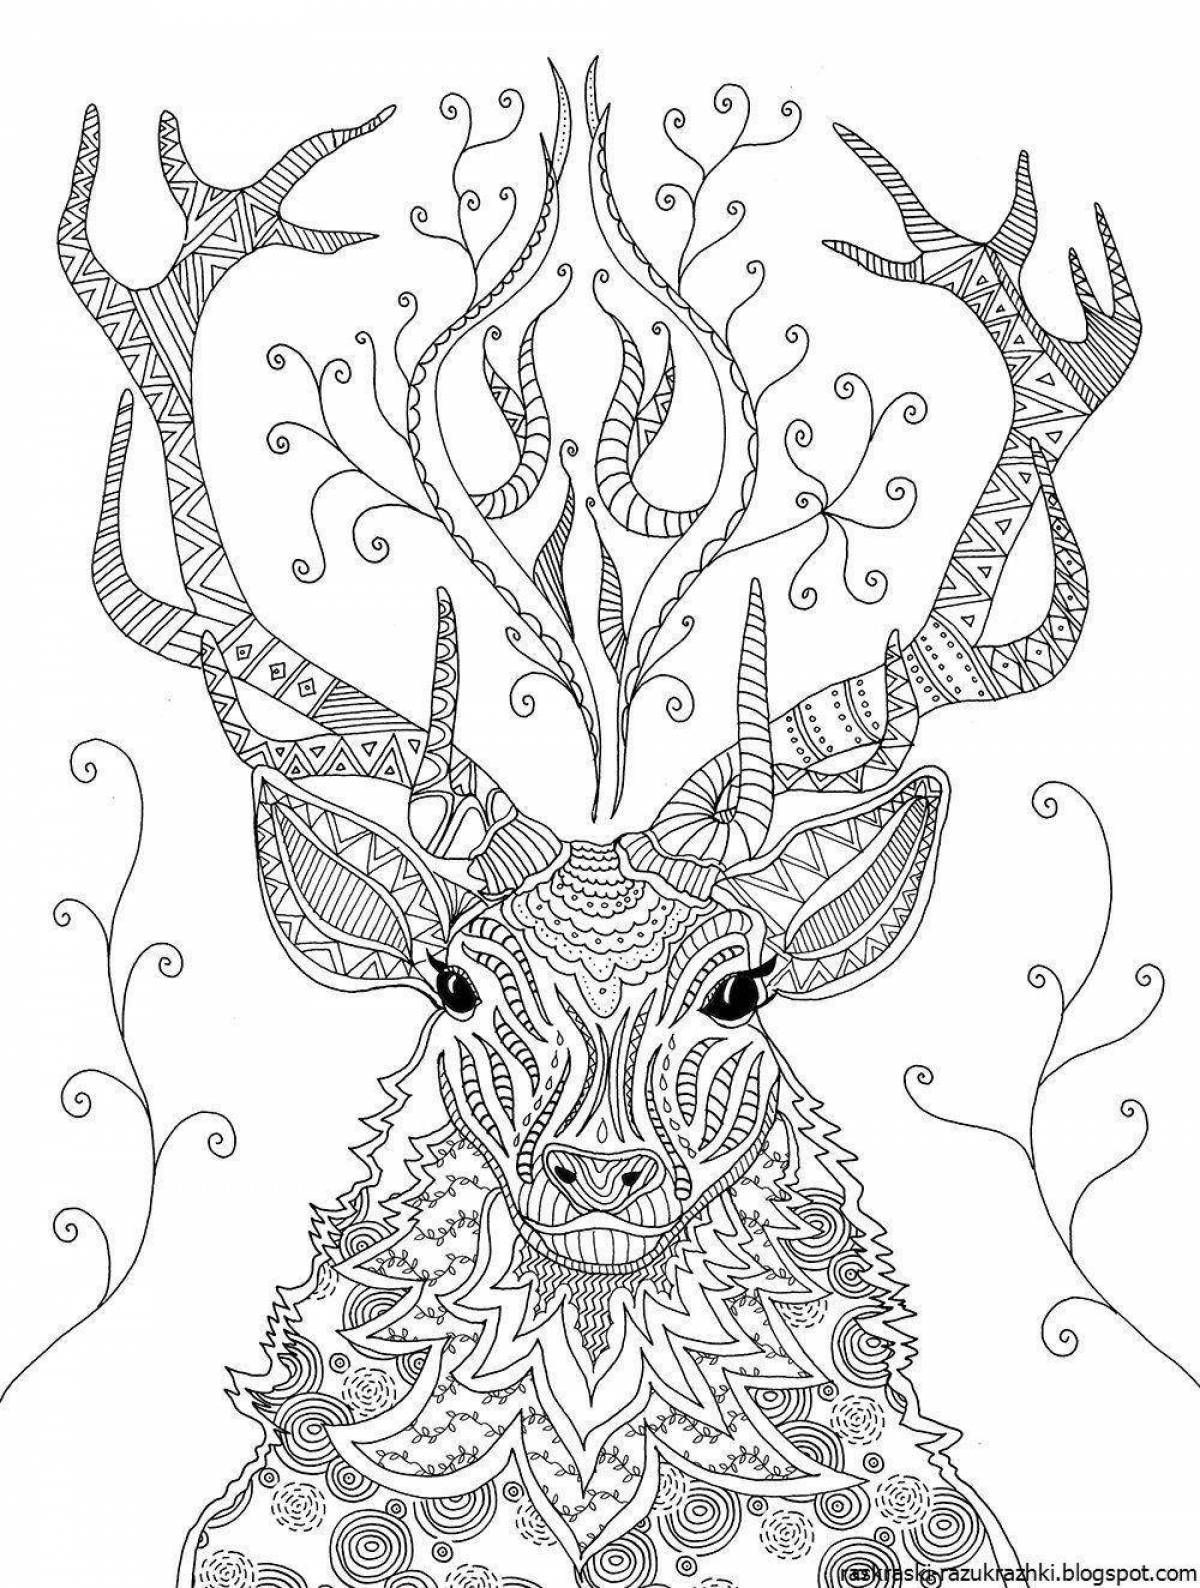 Amazing coloring pages for girls 12 years old complex patterns antistress animals